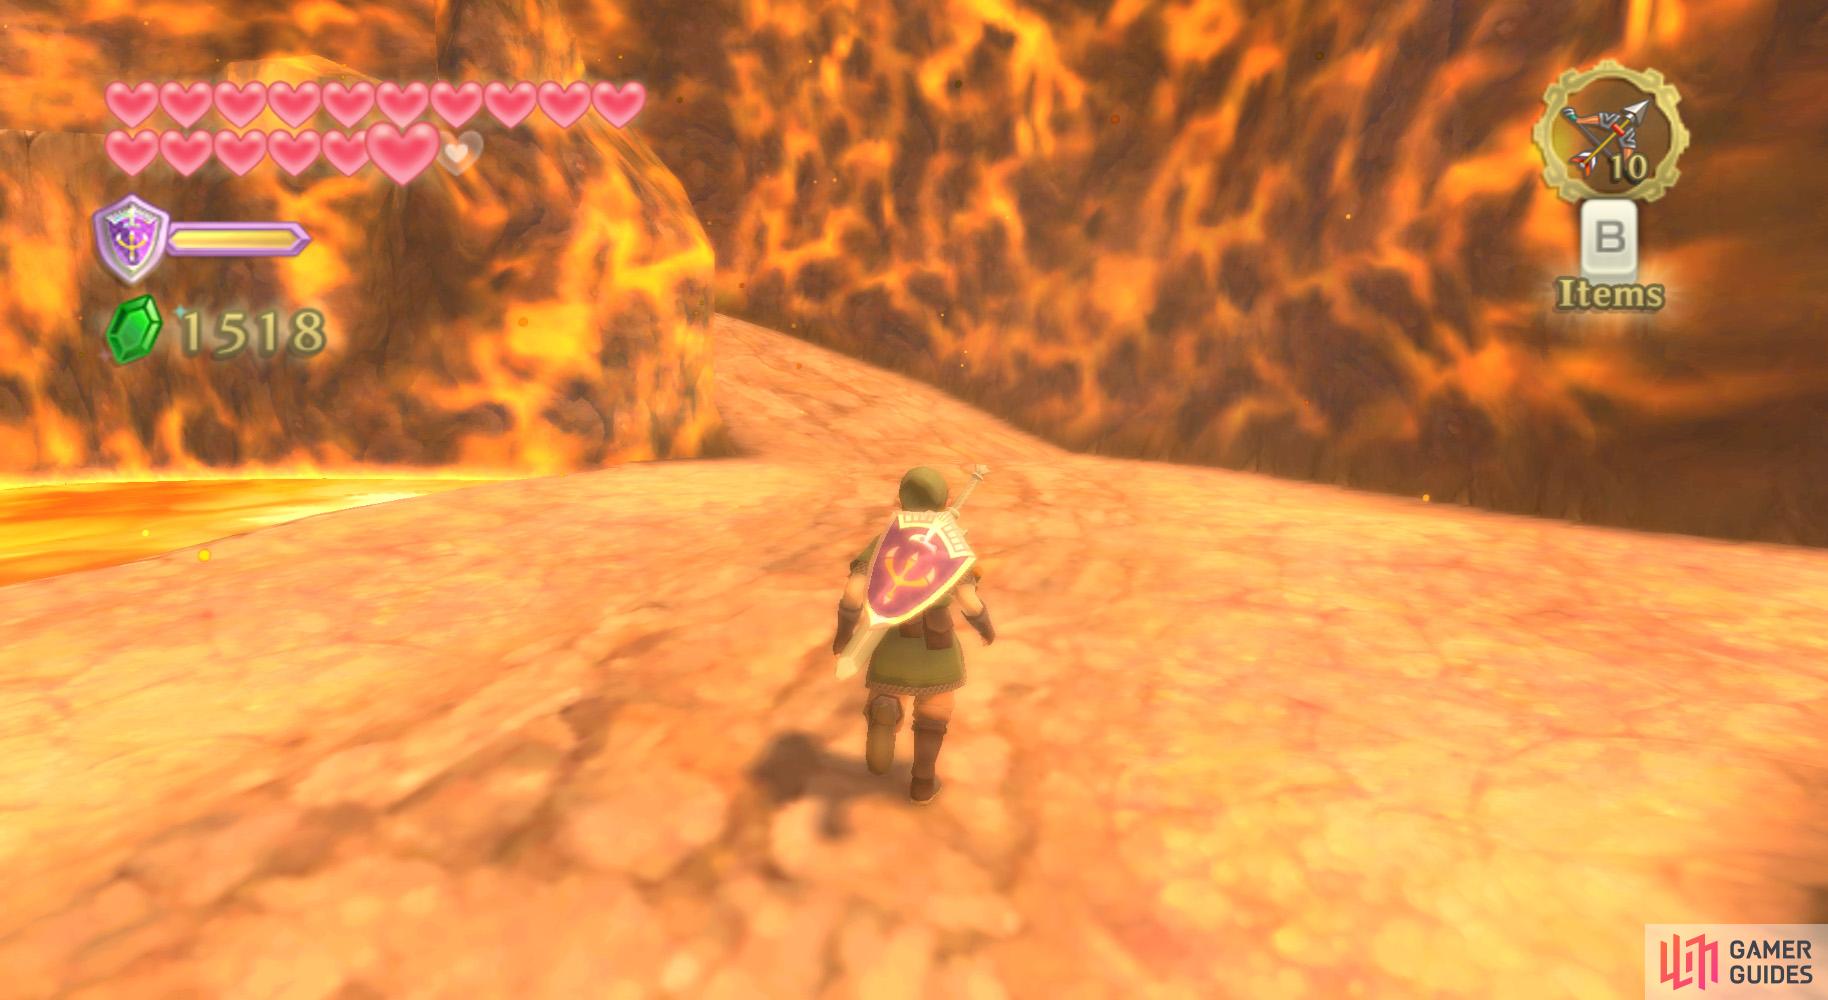 Then go through the scorching cavern, up the ramp and into the next area.